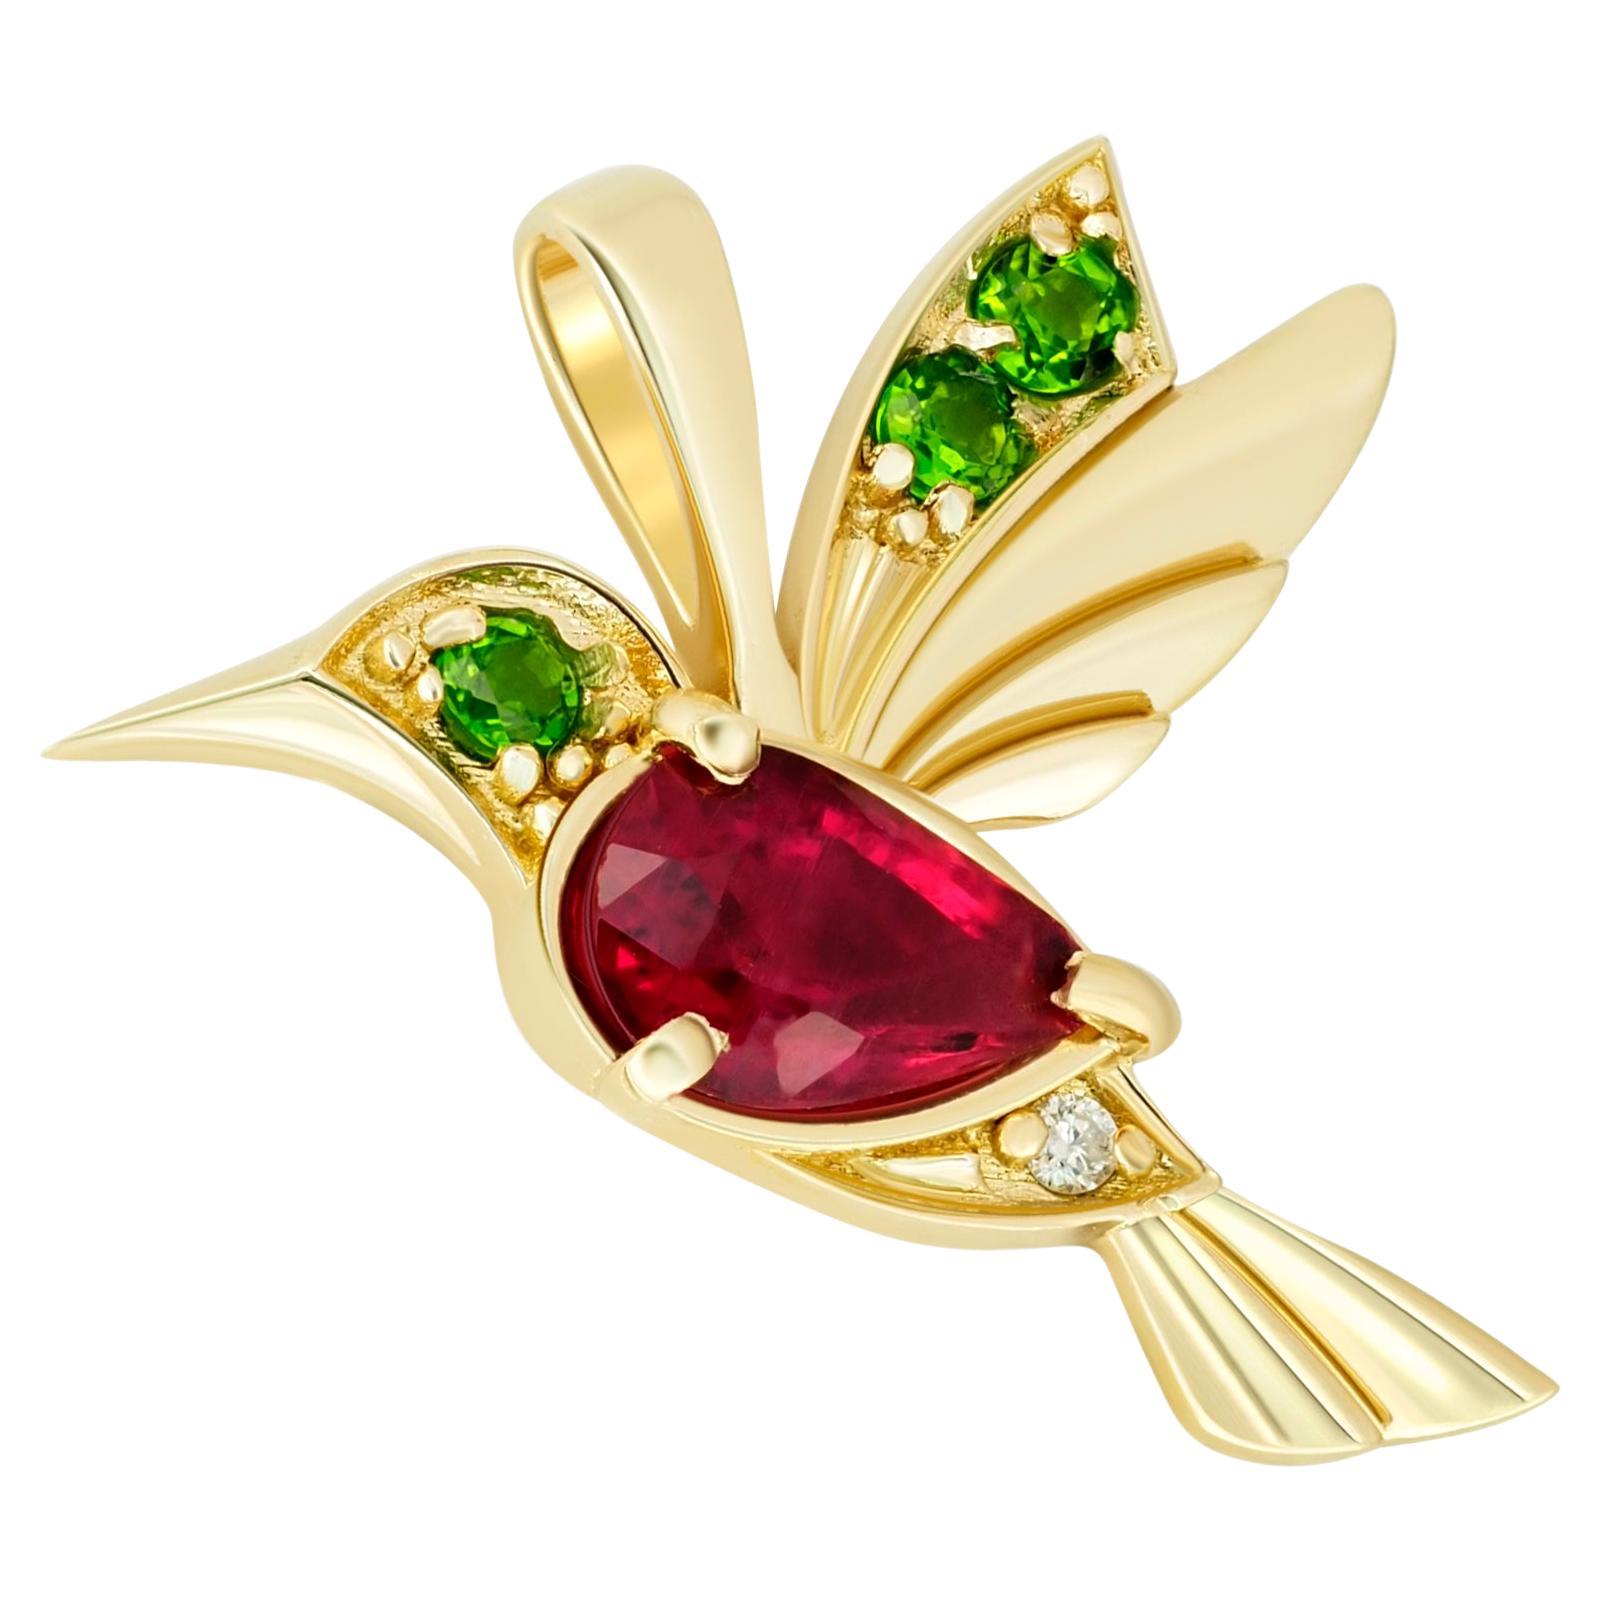 14k Gold Hummingbird Pendant with Rubies, Bird Pendant with Colored Gemstones! For Sale